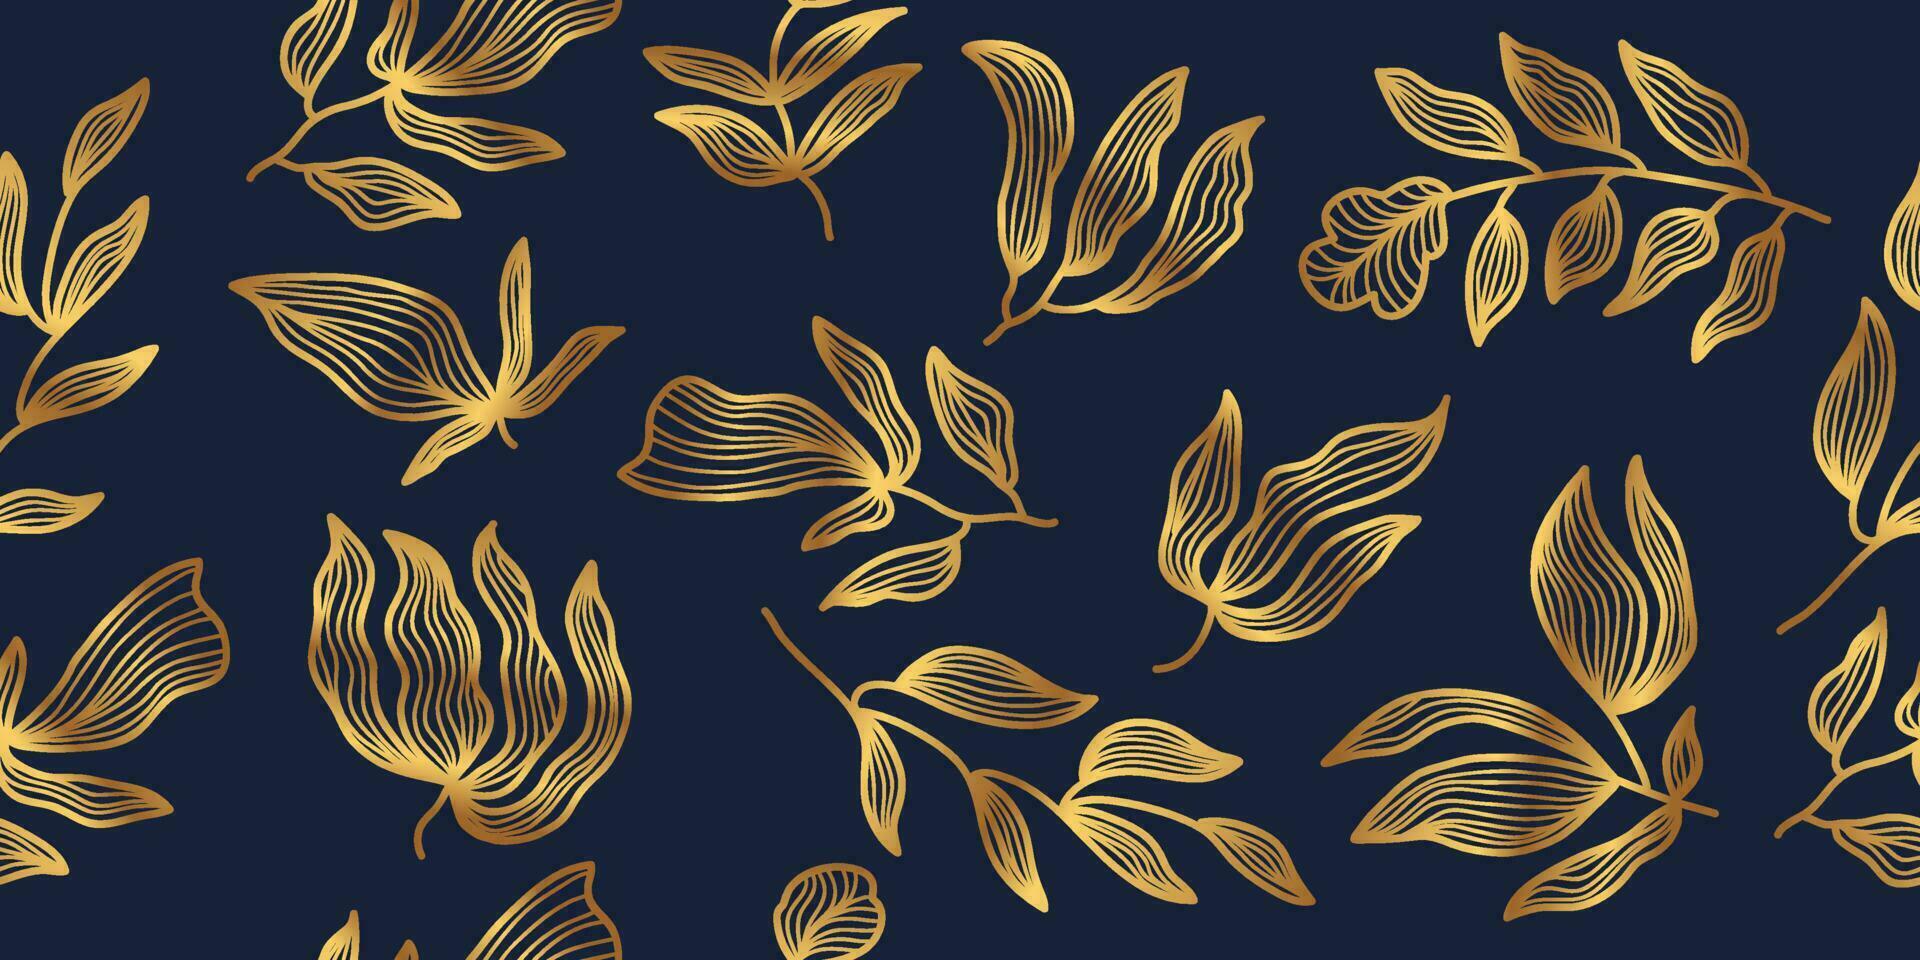 Seamless Exotic Floral Pattern in Luxurious Gold Gradient. Flower Motif. Suitable for Wallpaper, Wrapping Paper, Background, Fabric, Textile, Apparel, and Card Design vector